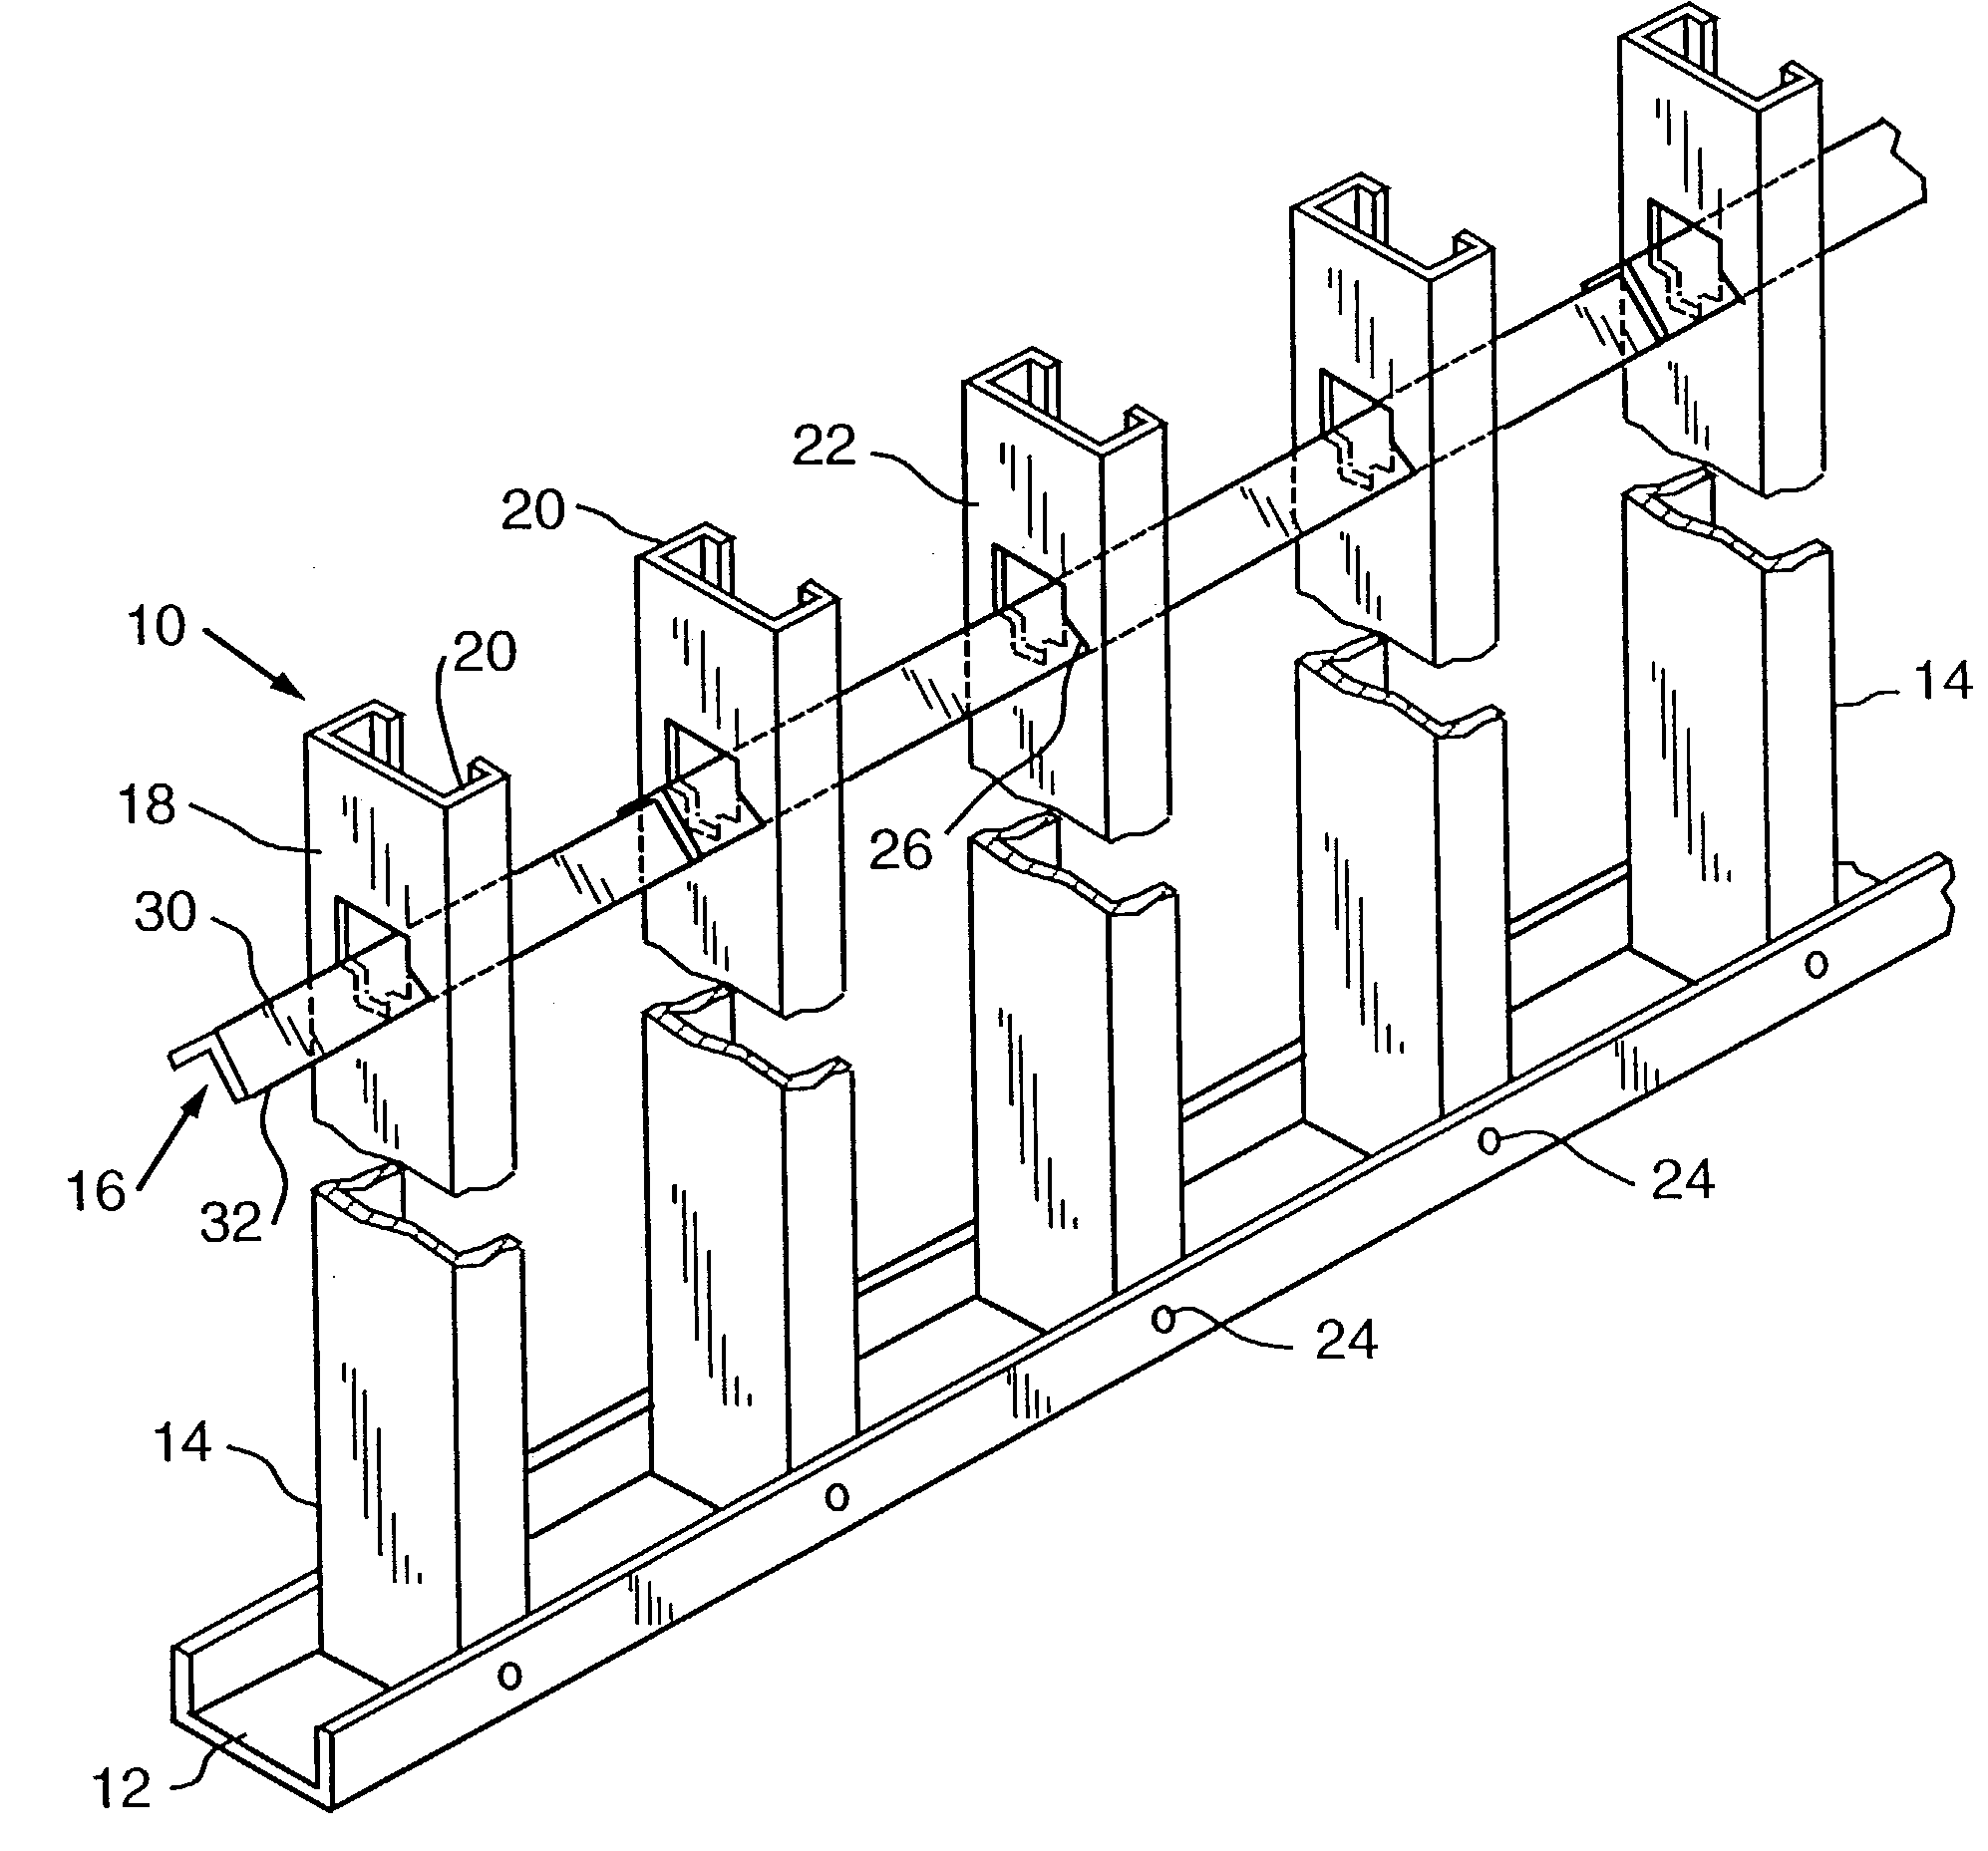 Support apparatuses and jambs for windows and doors and methods of constructing same